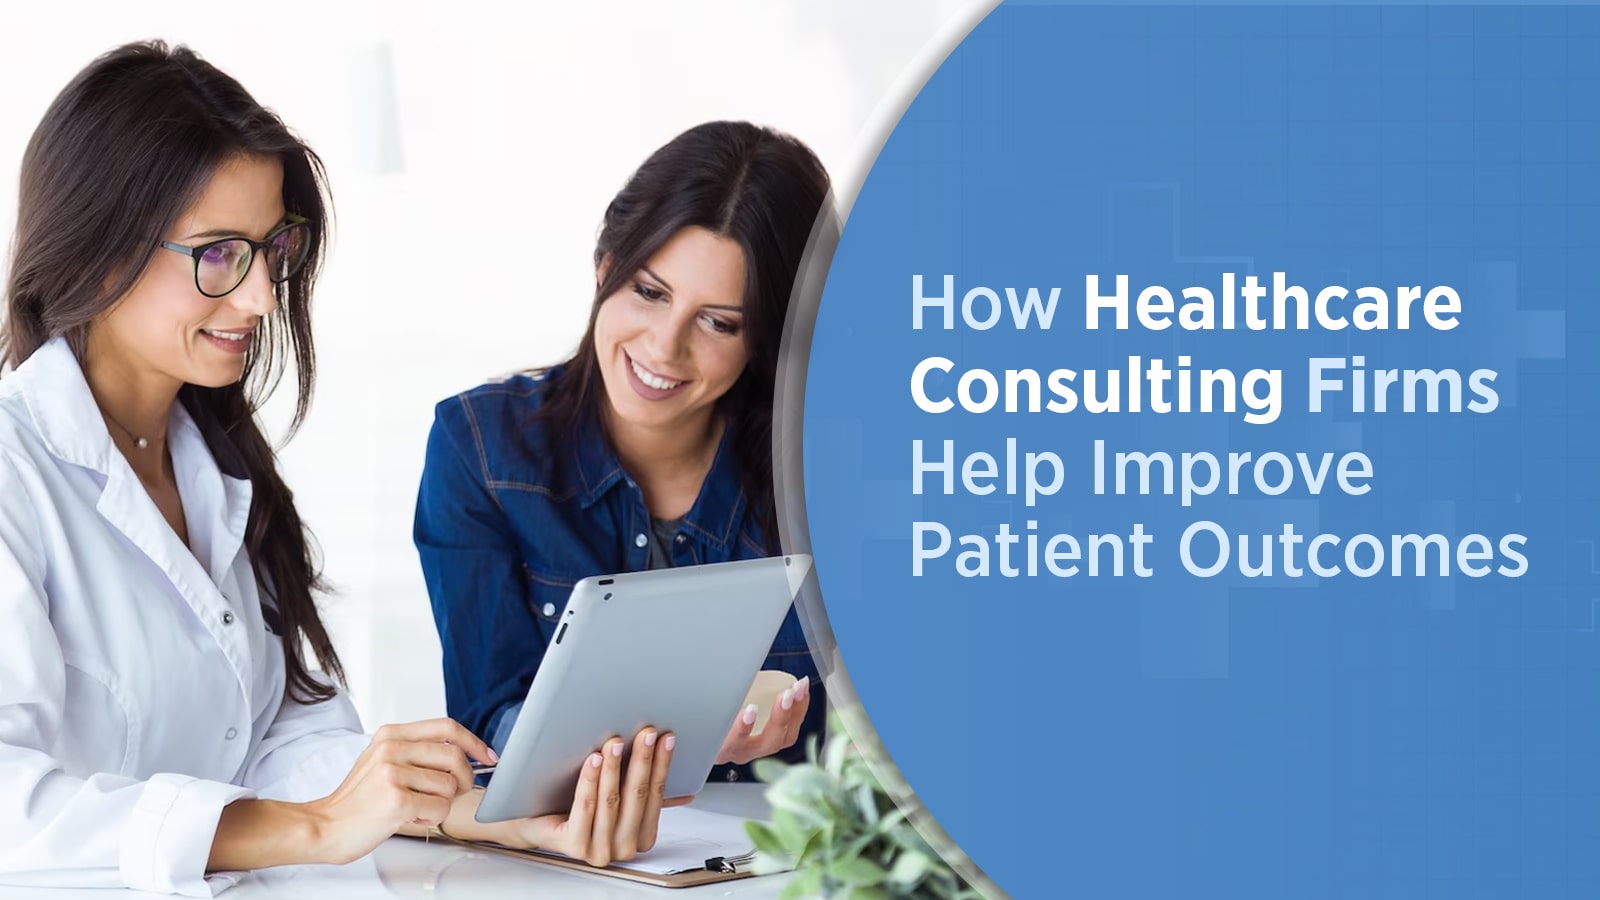 Healthcare consulting firms